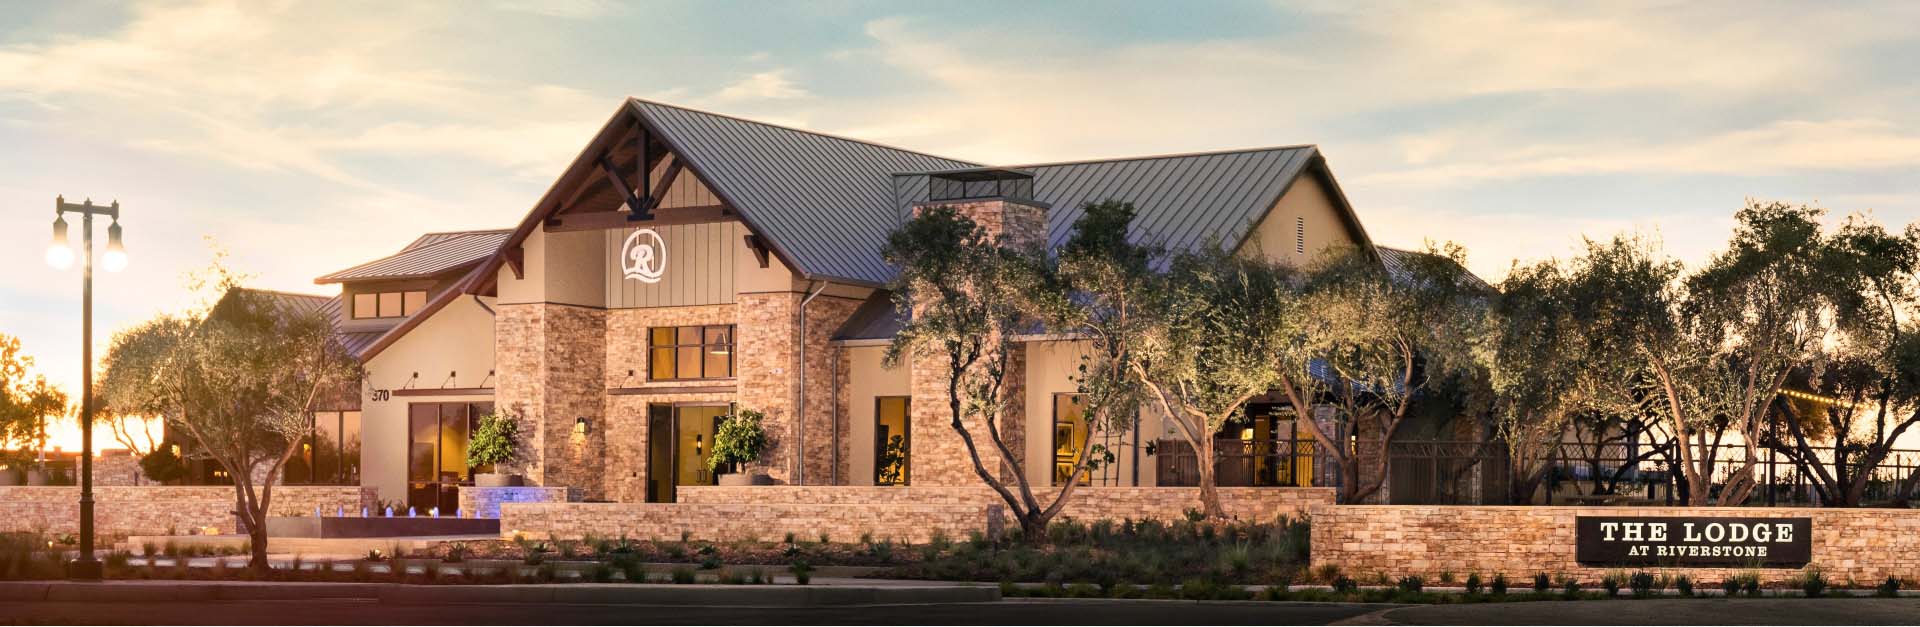 Exterior view of the Lodge at Riverstone, a community amenity available to Magnolia at Riverstone residents.